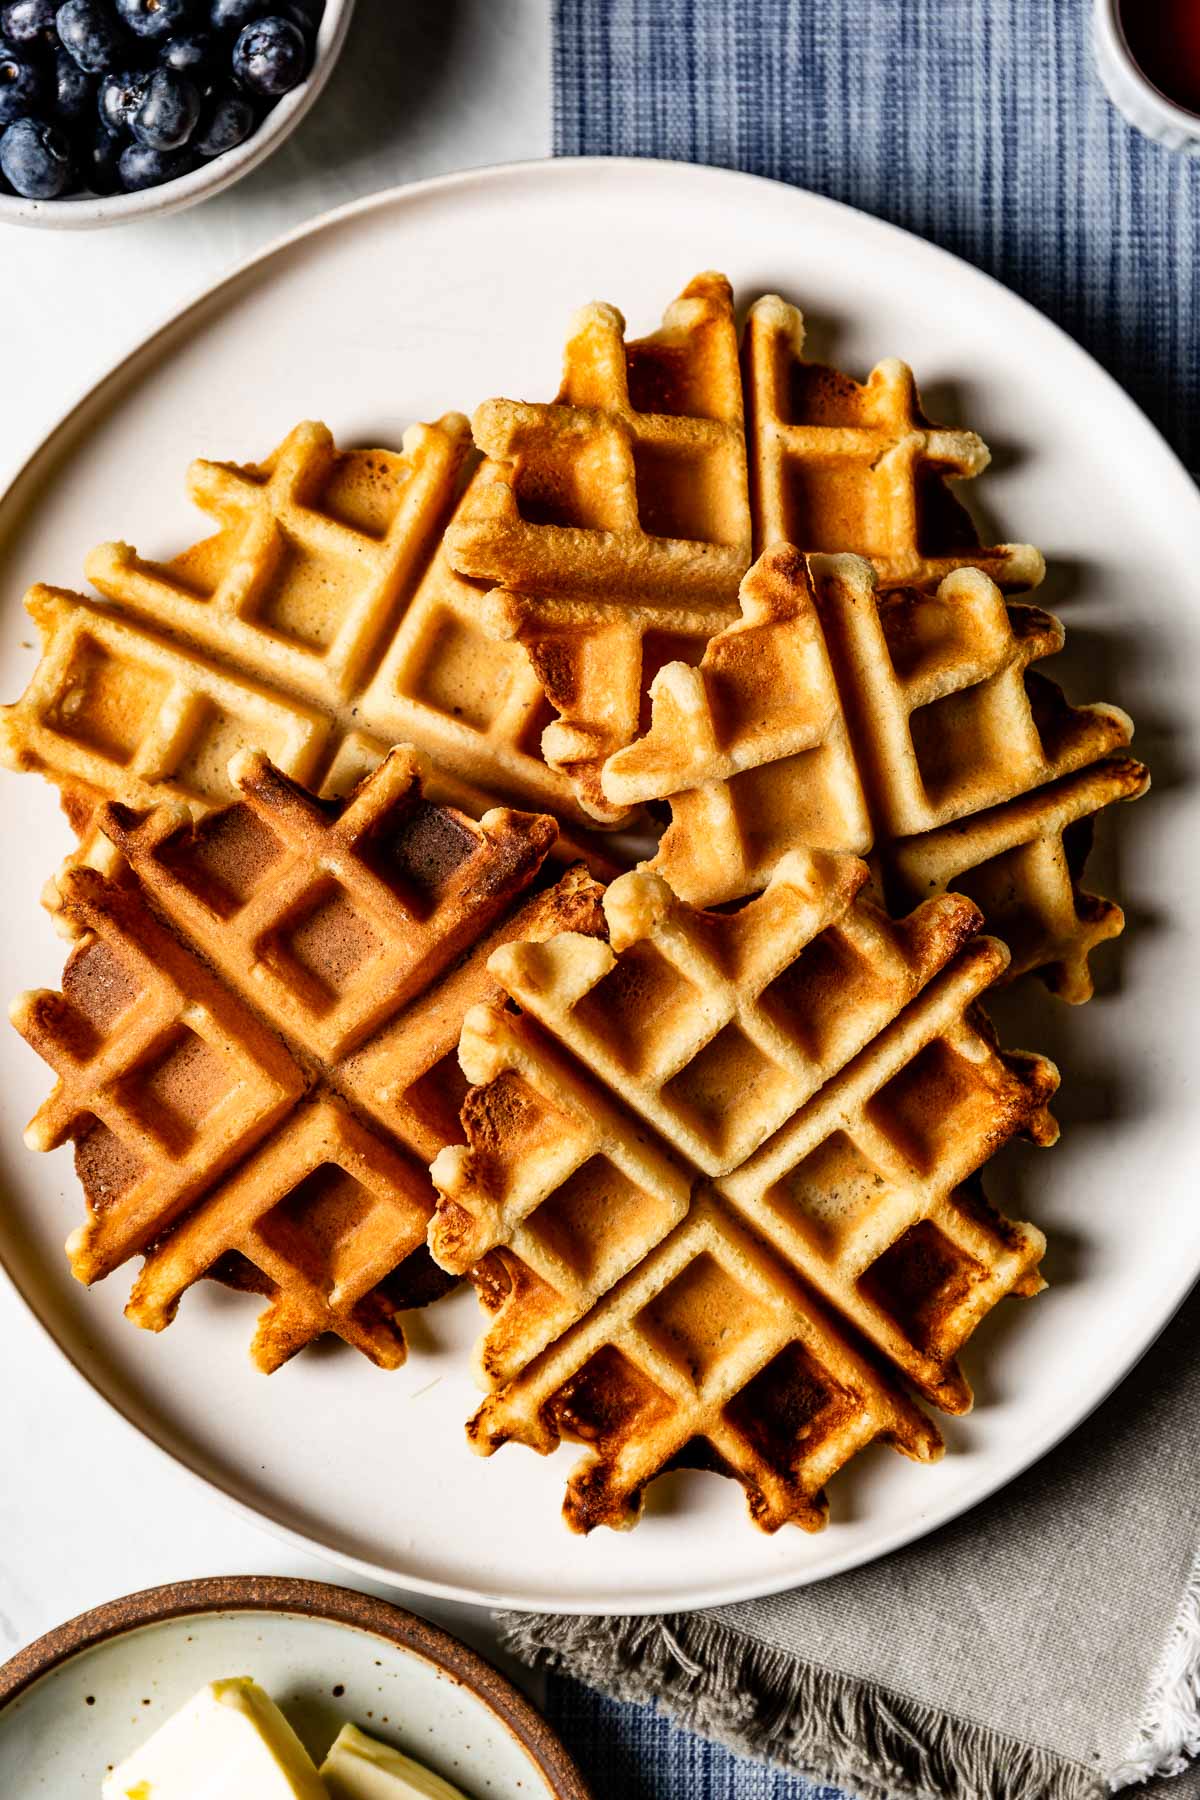 Almond flour waffles in a plate from the top view